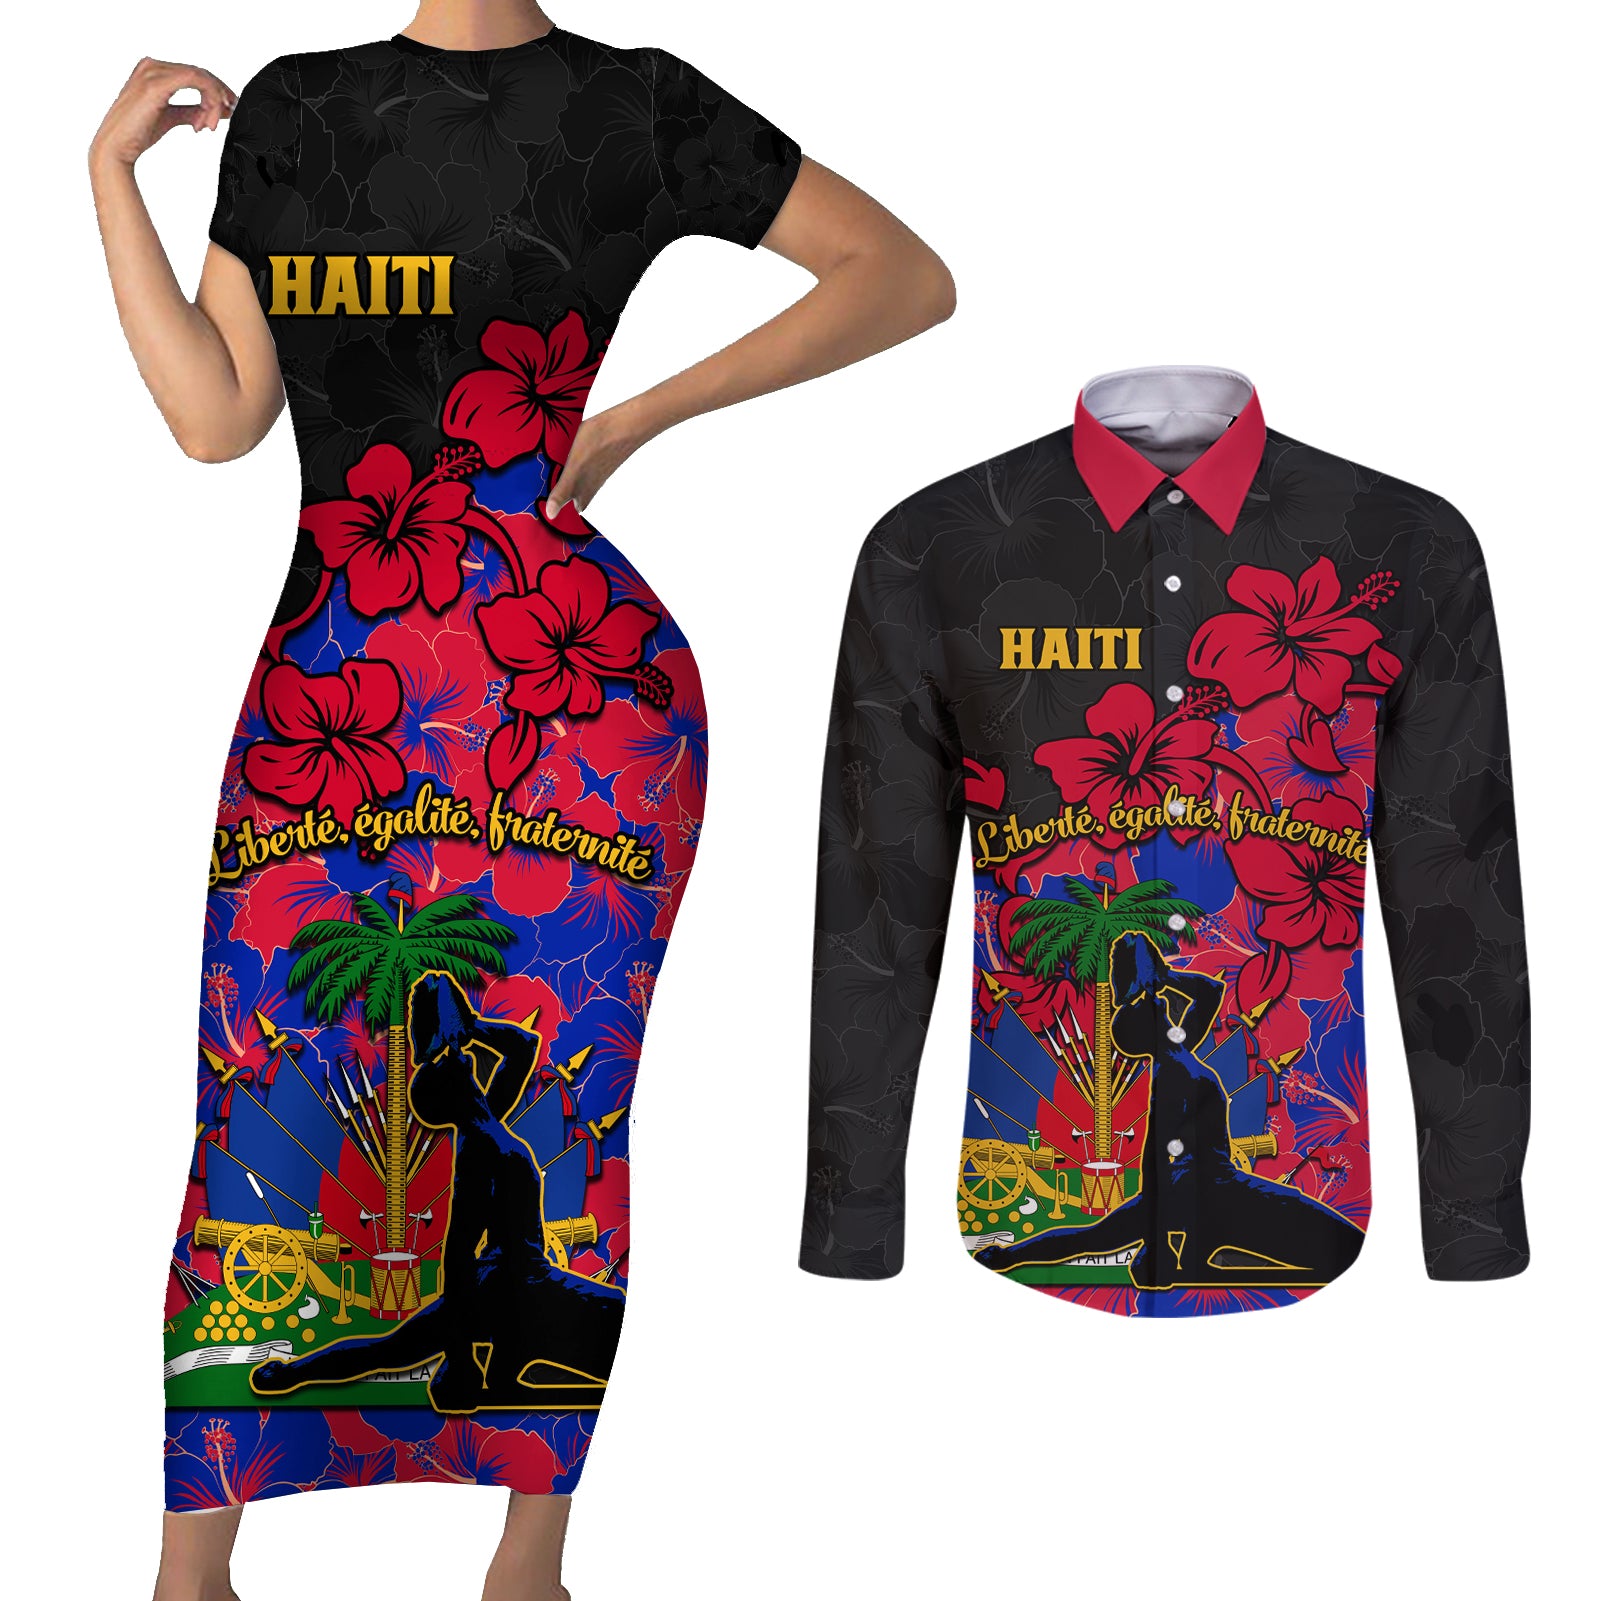 haiti-independence-day-couples-matching-short-sleeve-bodycon-dress-and-long-sleeve-button-shirt-hibiscus-neg-marron